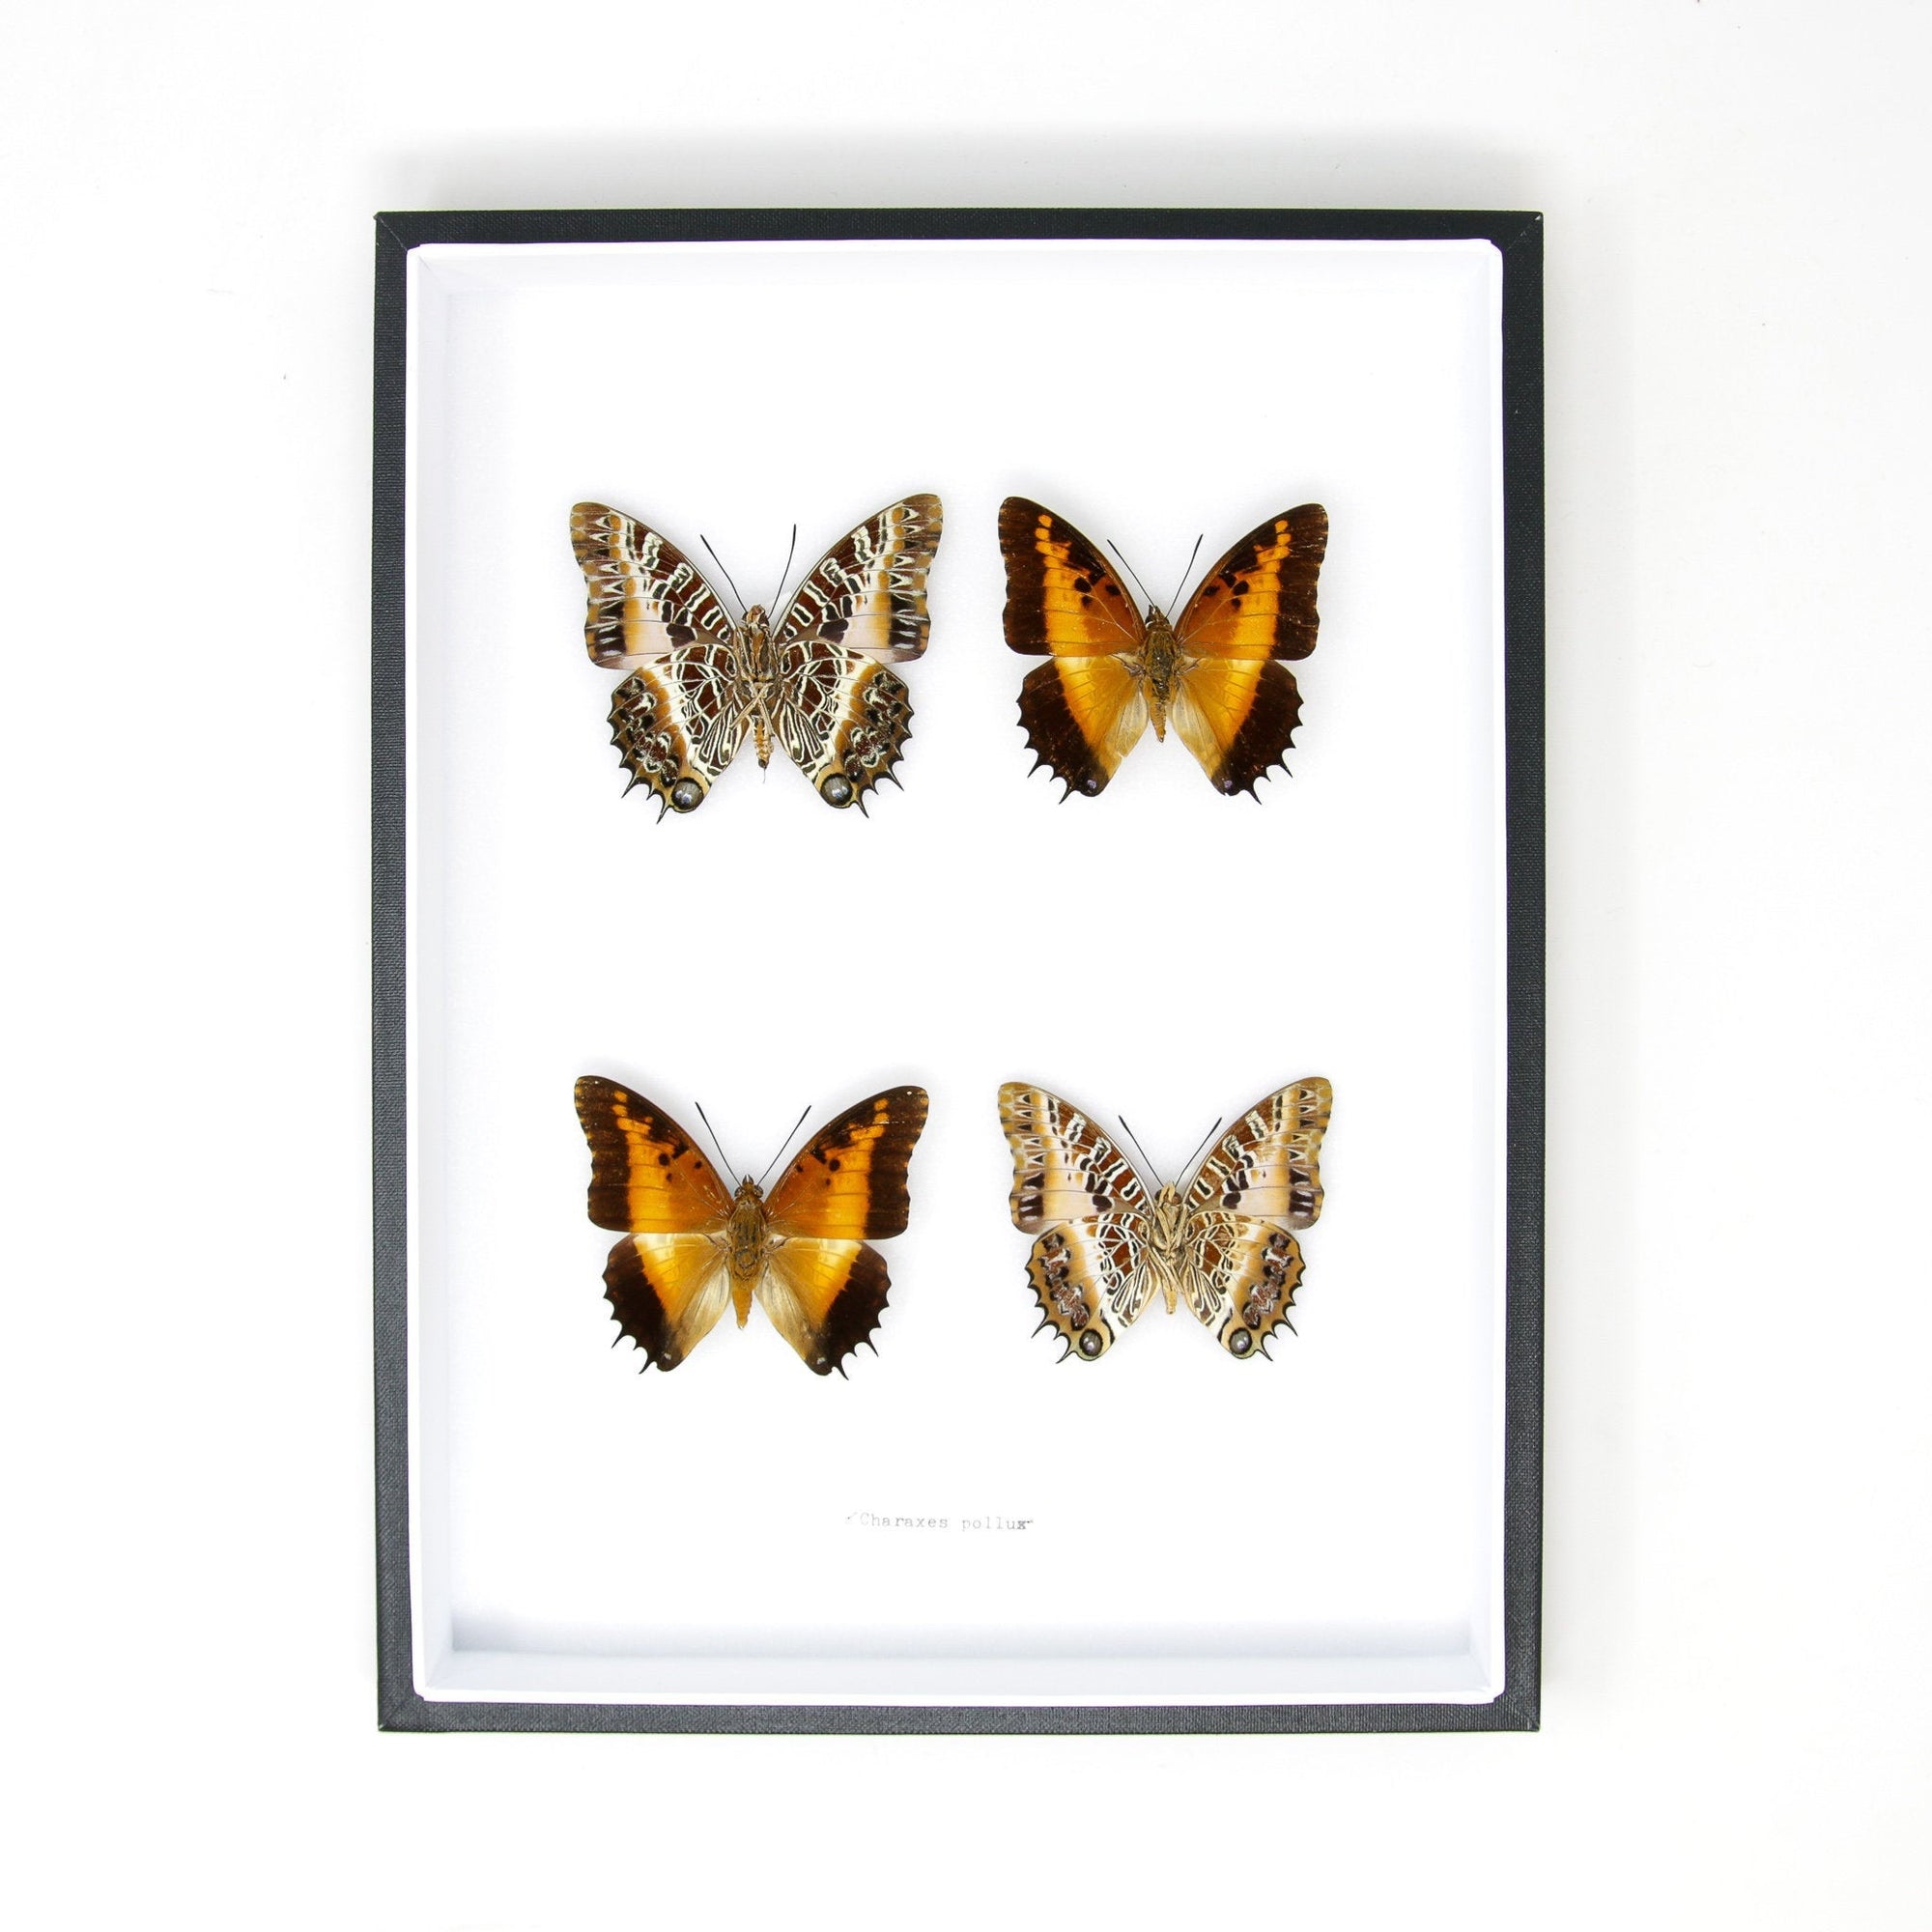 Vintage Butterfly Collection | Pinned Entomology Lepidoptera Specimens | Presented in a Museum Display Case | 12x9x2 inch